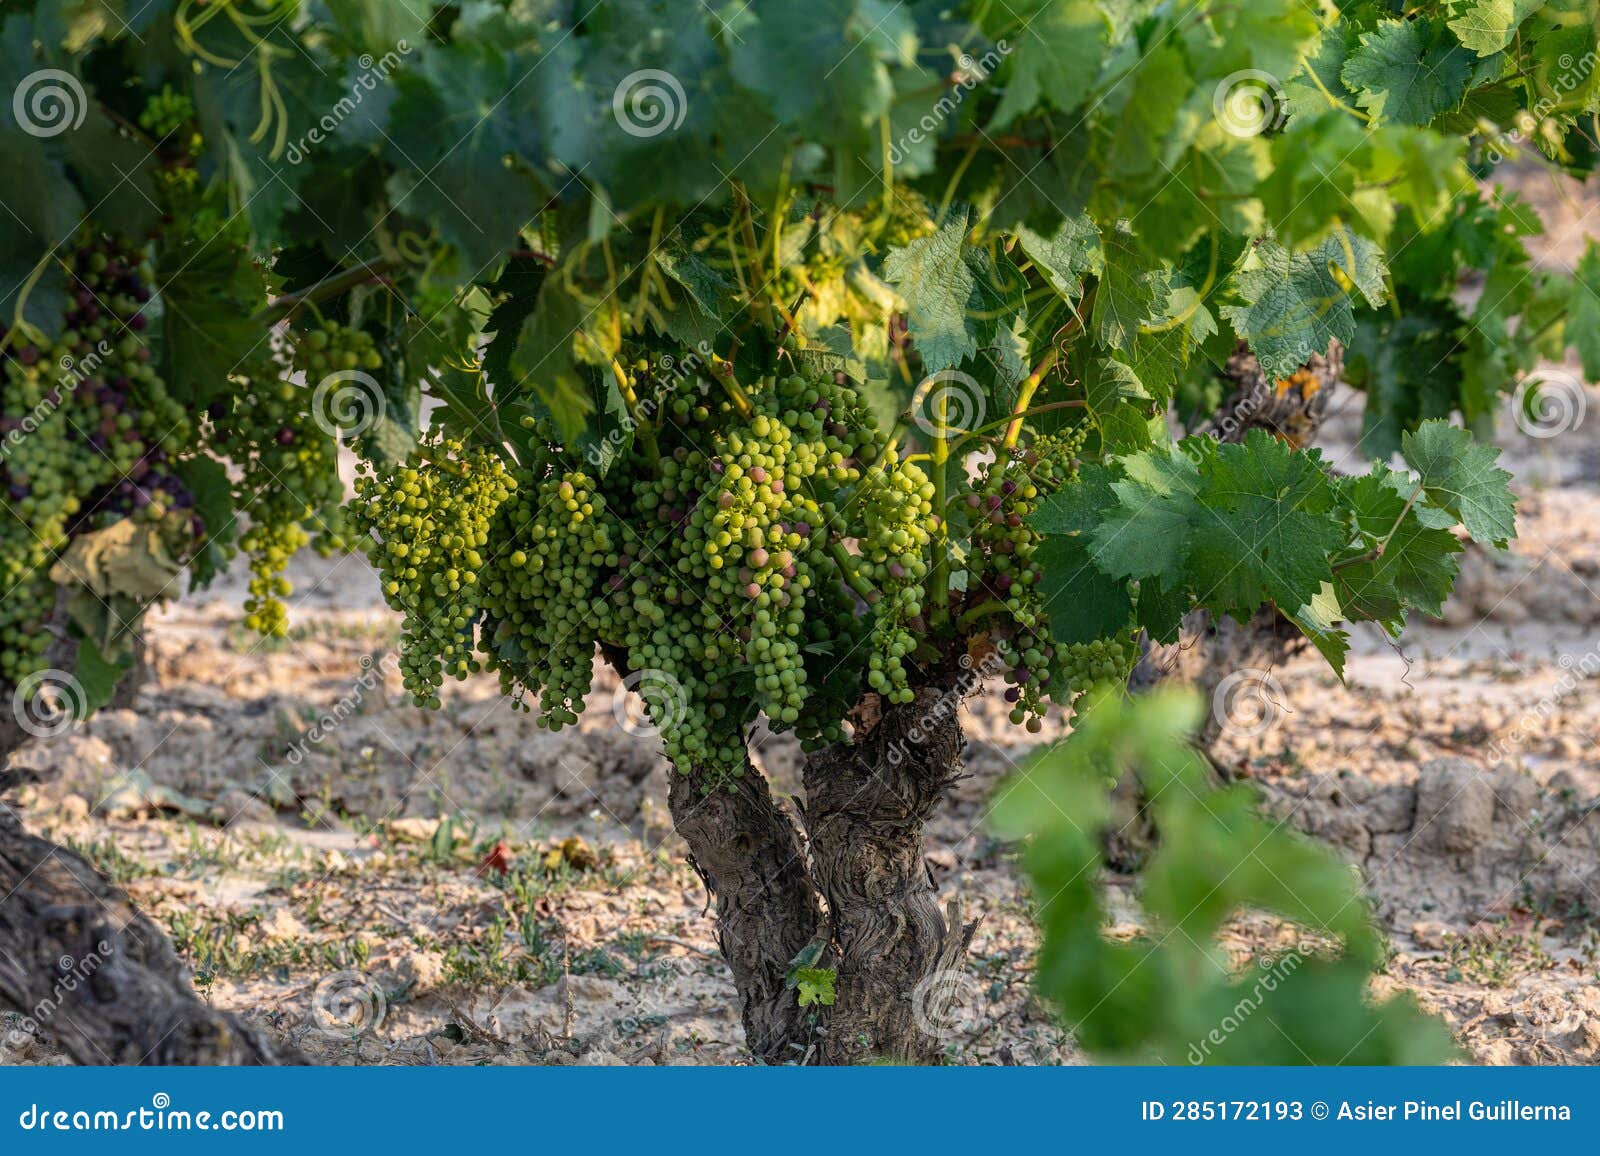 clusters of grapes ripening on the vine during the summer